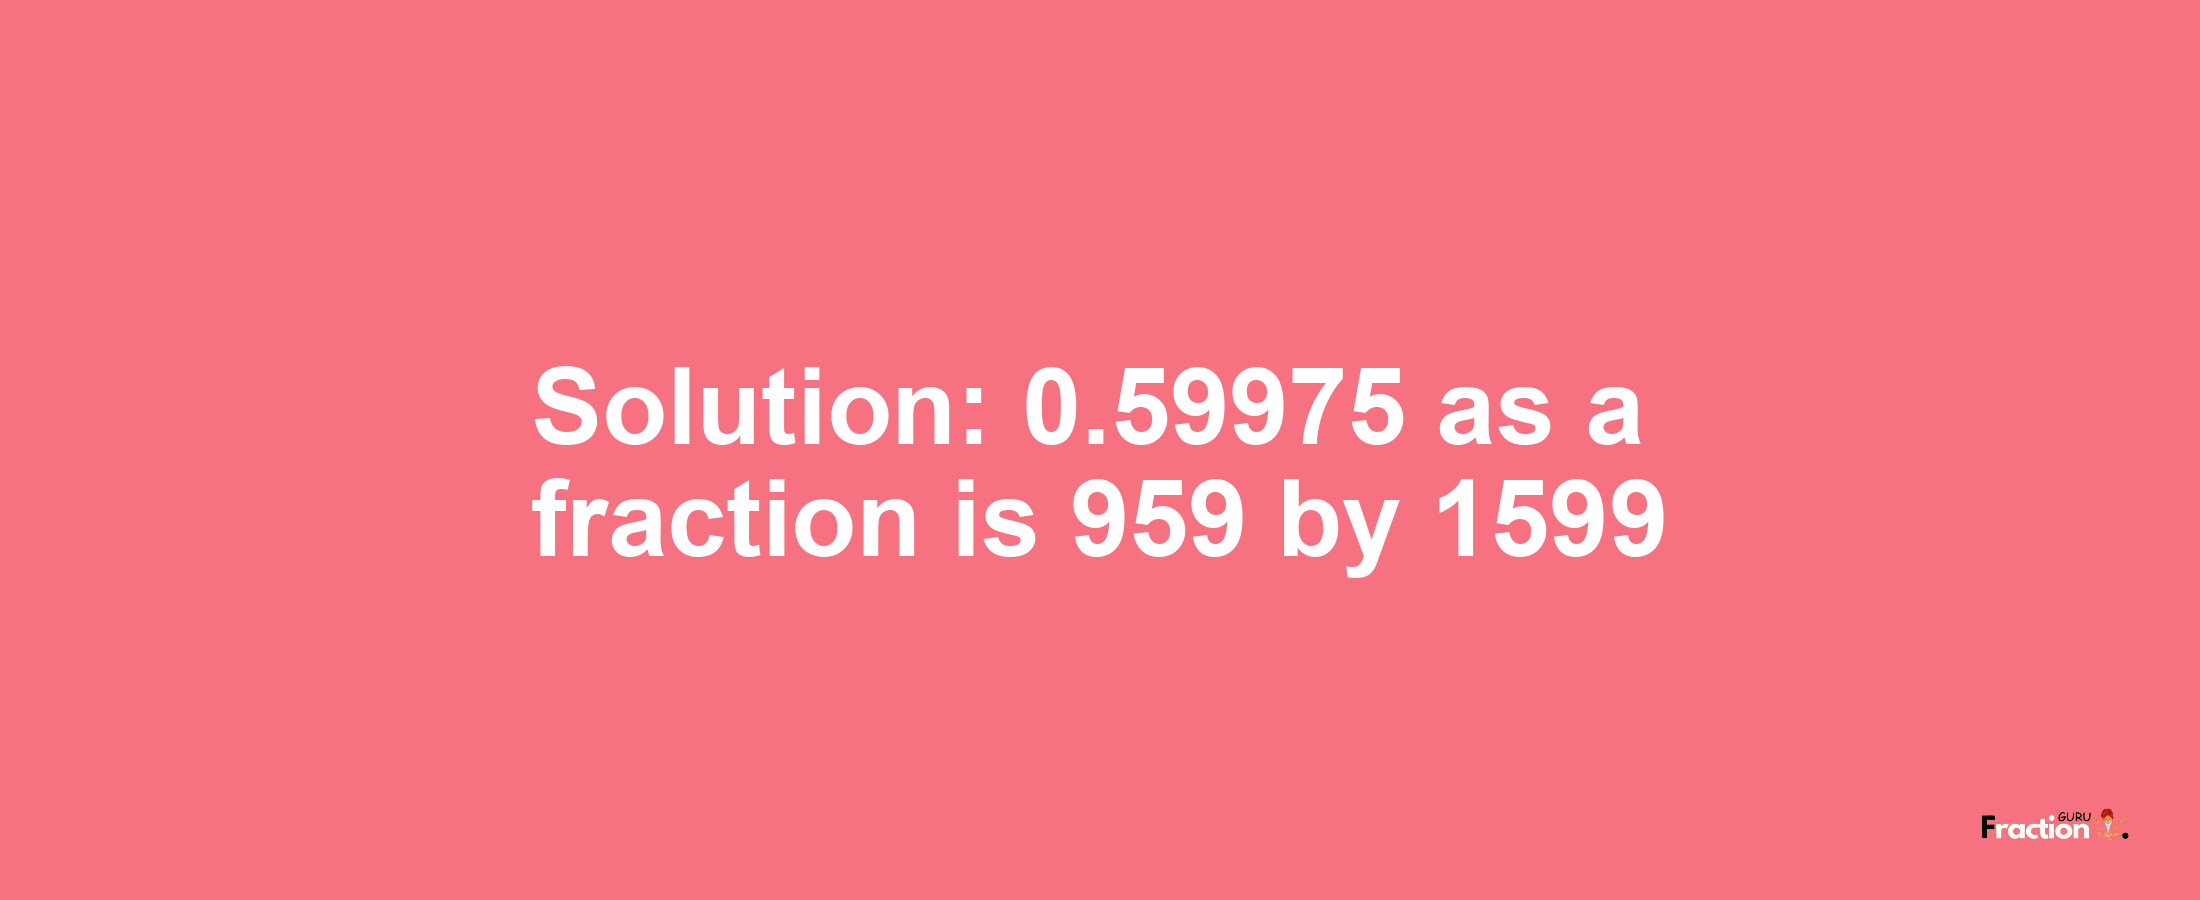 Solution:0.59975 as a fraction is 959/1599